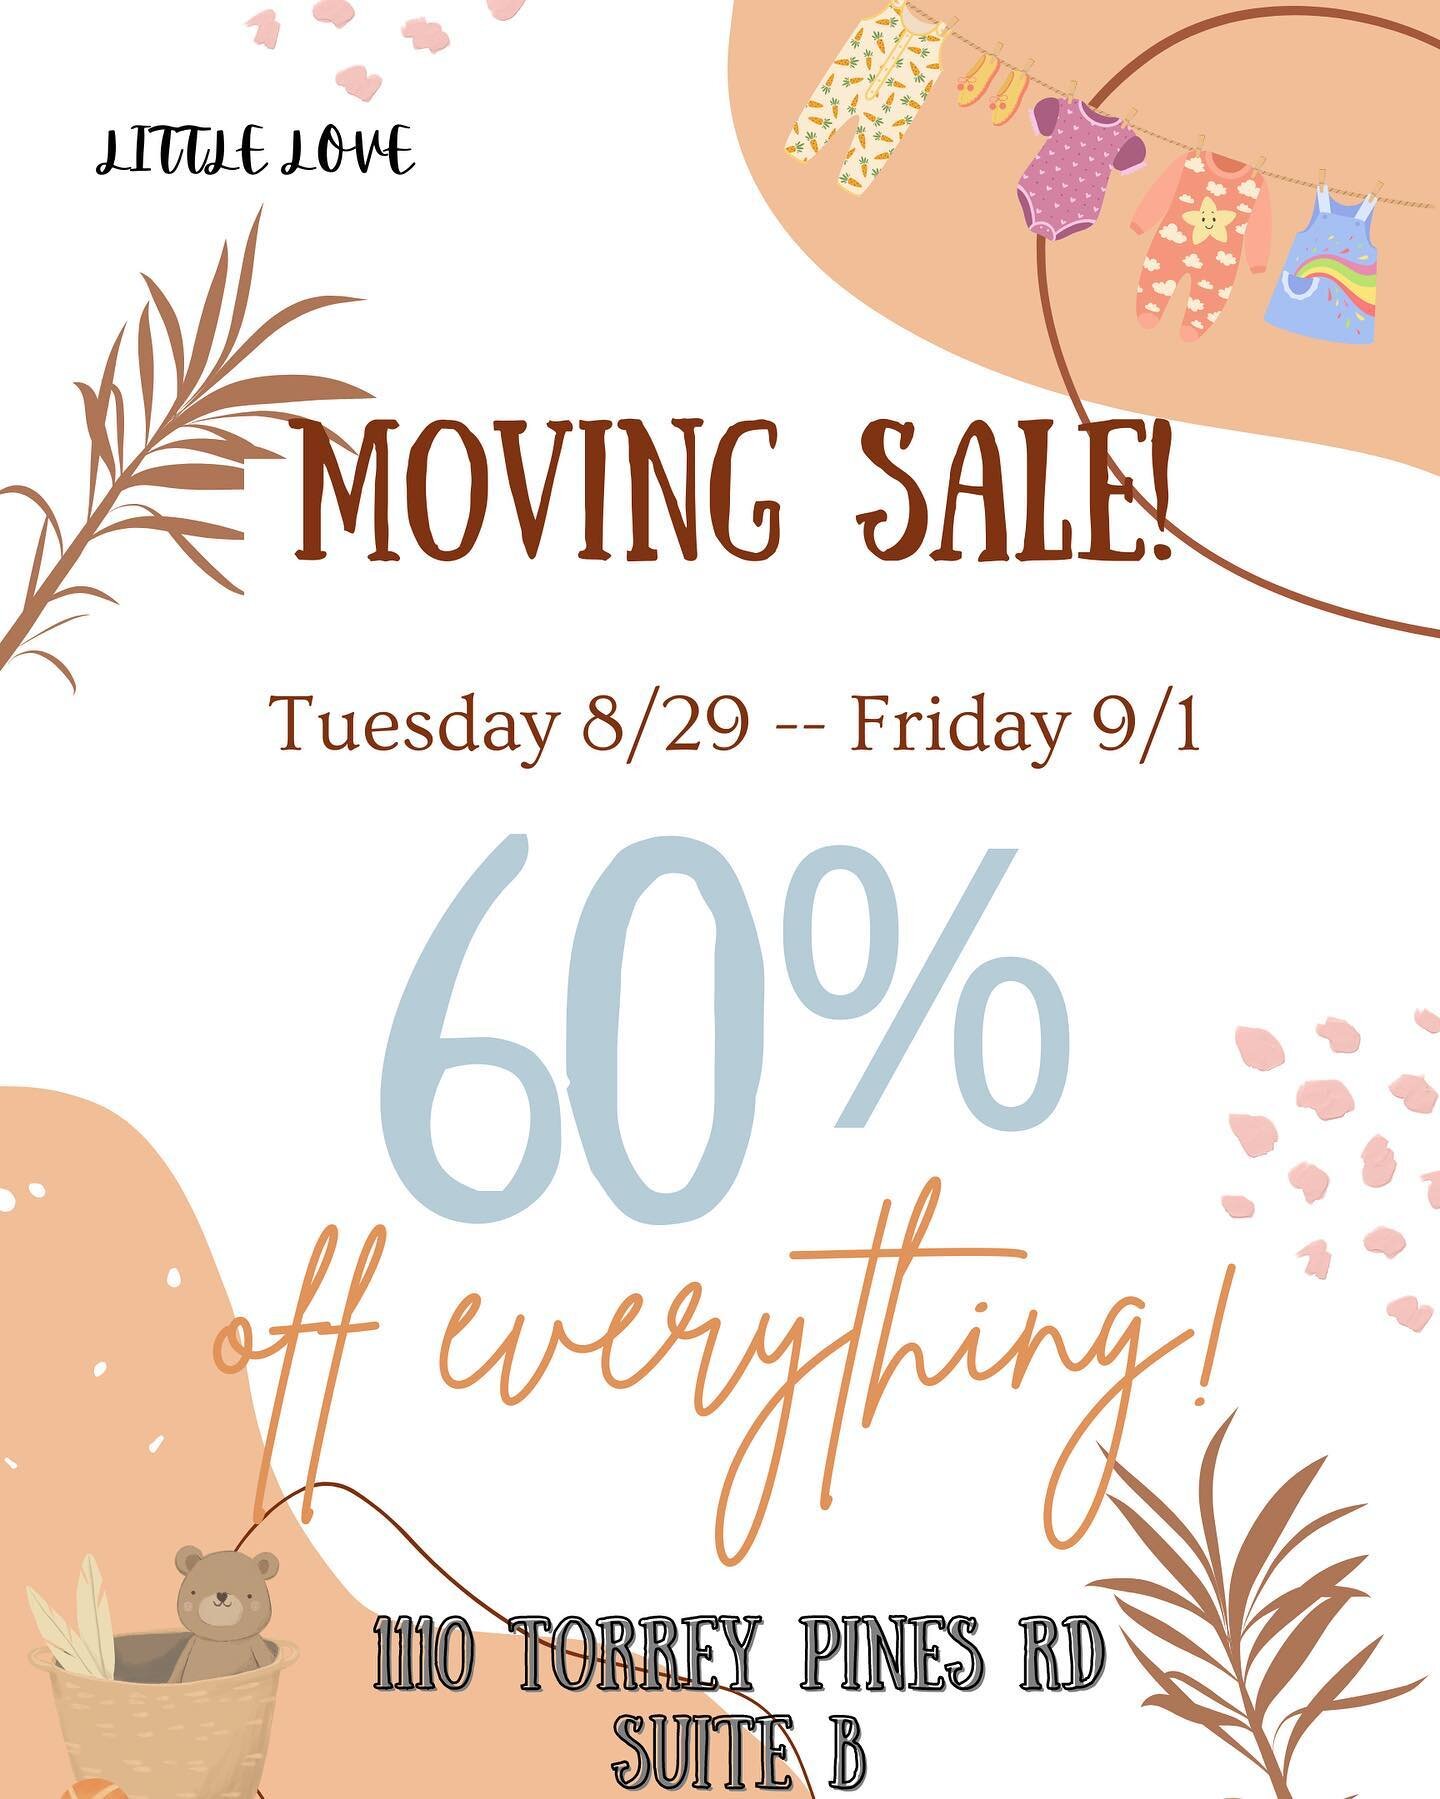 We are moving&hellip;in the same building!  Come shop our moving sale this week Tuesday thru Friday and receive 60% off everything in our old store. Stock up on some good basics for the new school year.  Then make sure to come to our grand opening in